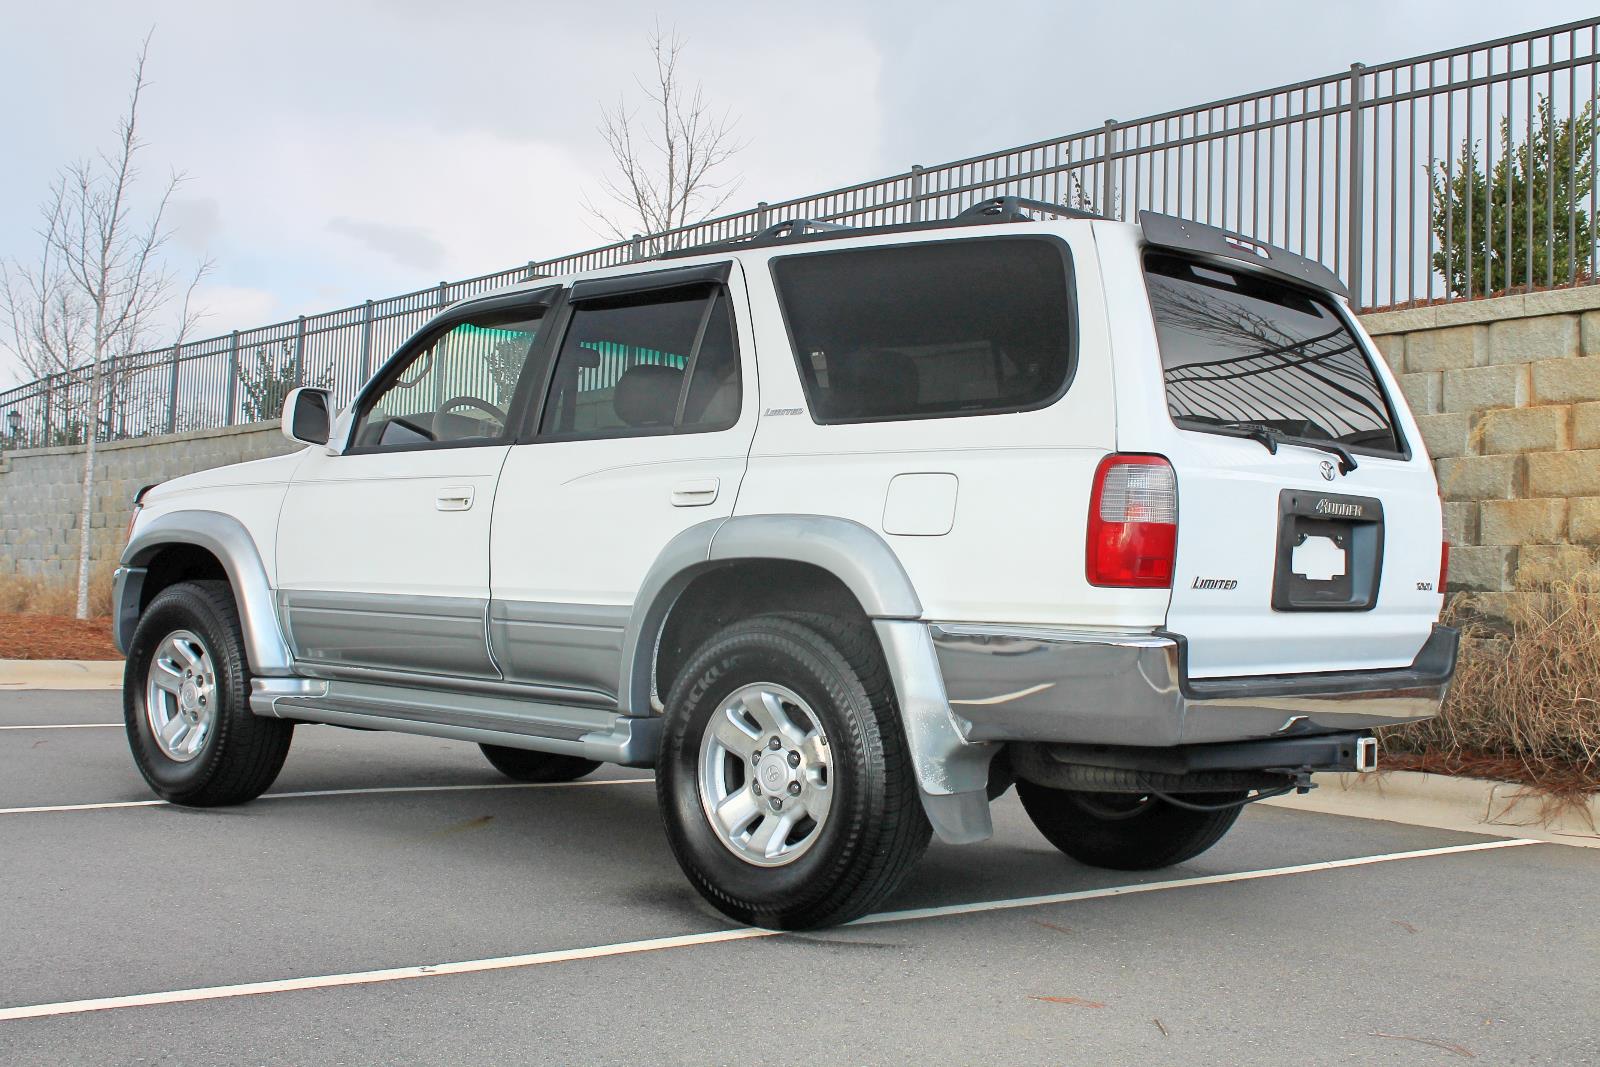 1998 Toyota 4runner Limited 4x4